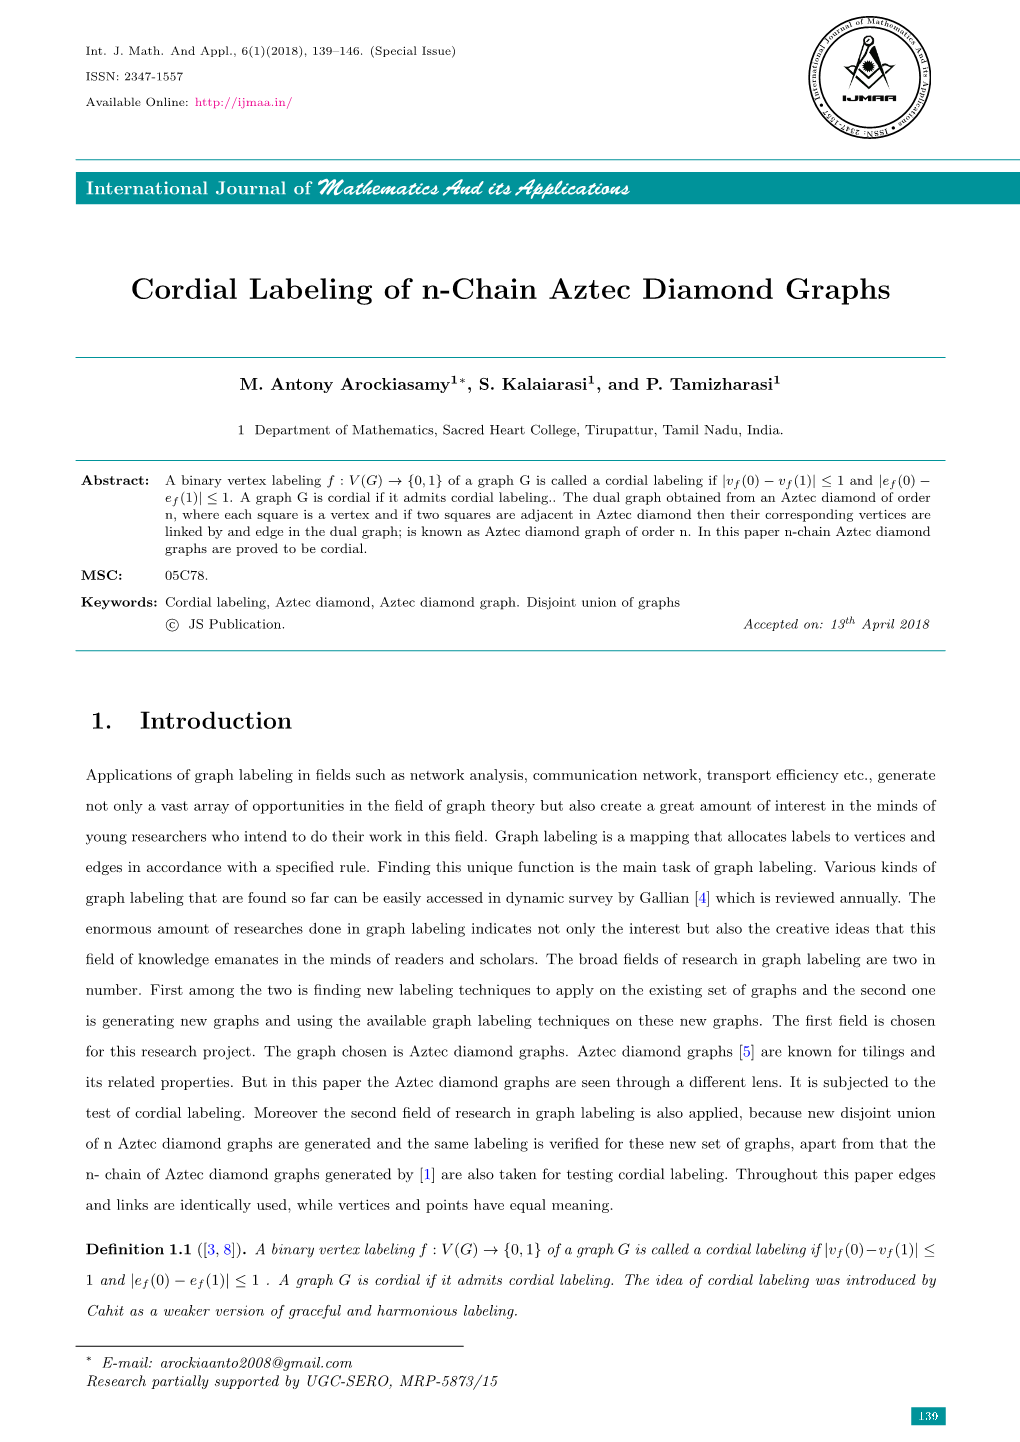 Cordial Labeling of N-Chain Aztec Diamond Graphs